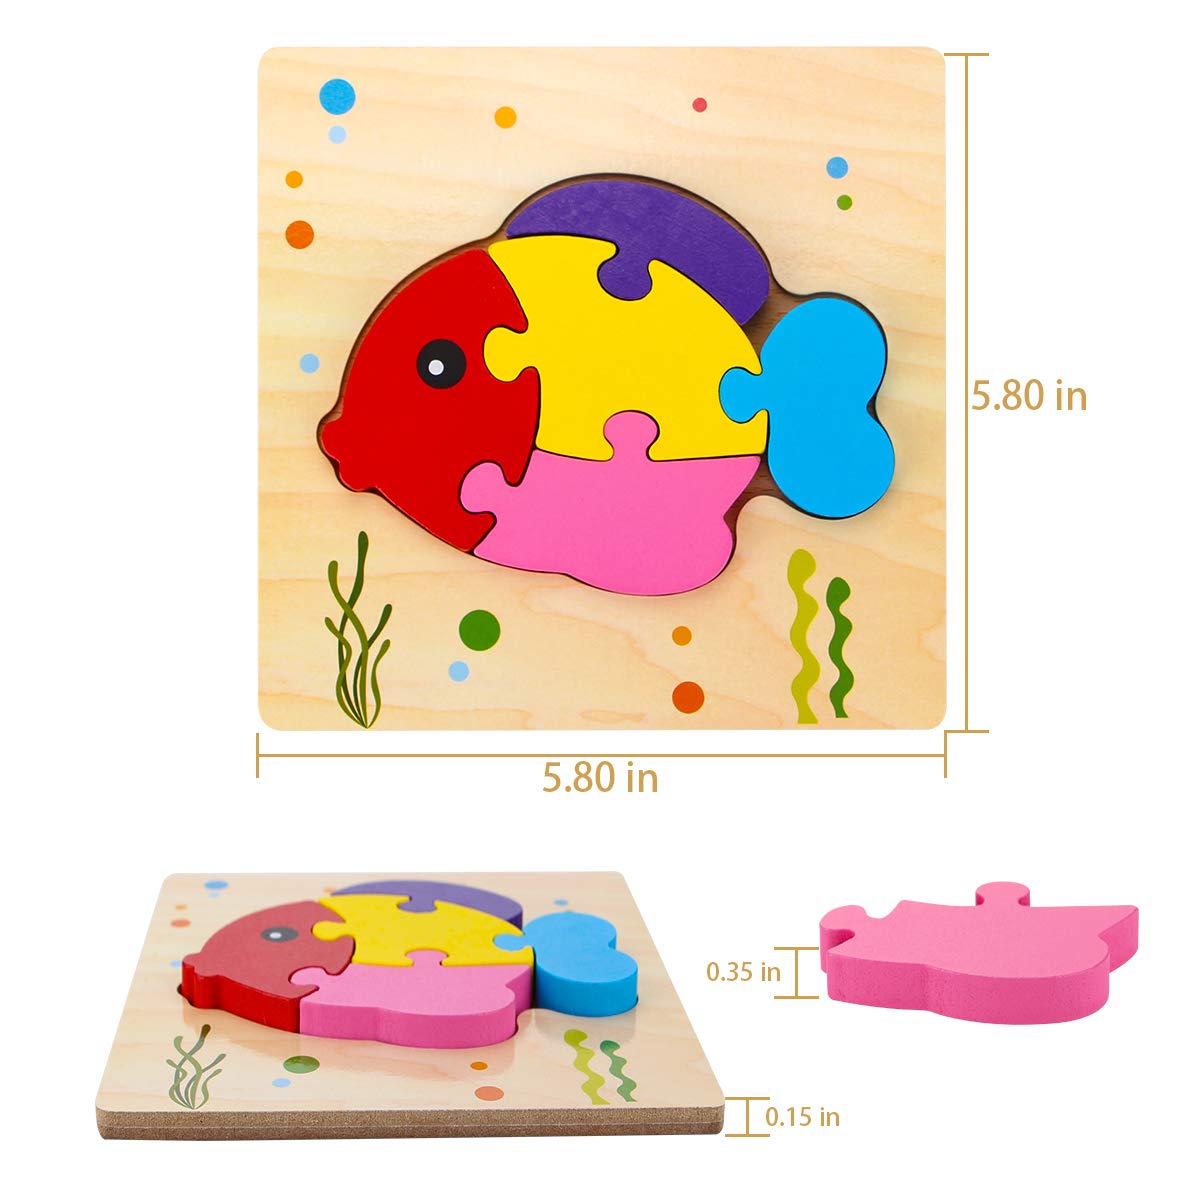 SKYFIELD Wooden Animal Toddler Puzzles for 1 2 3 Years Old Boys & Girls, Baby STEM Educational Toy Gift with 4 Animals Montessori Bright Color Shapes Learning Puzzles,Great Gift Ideas for 1-3